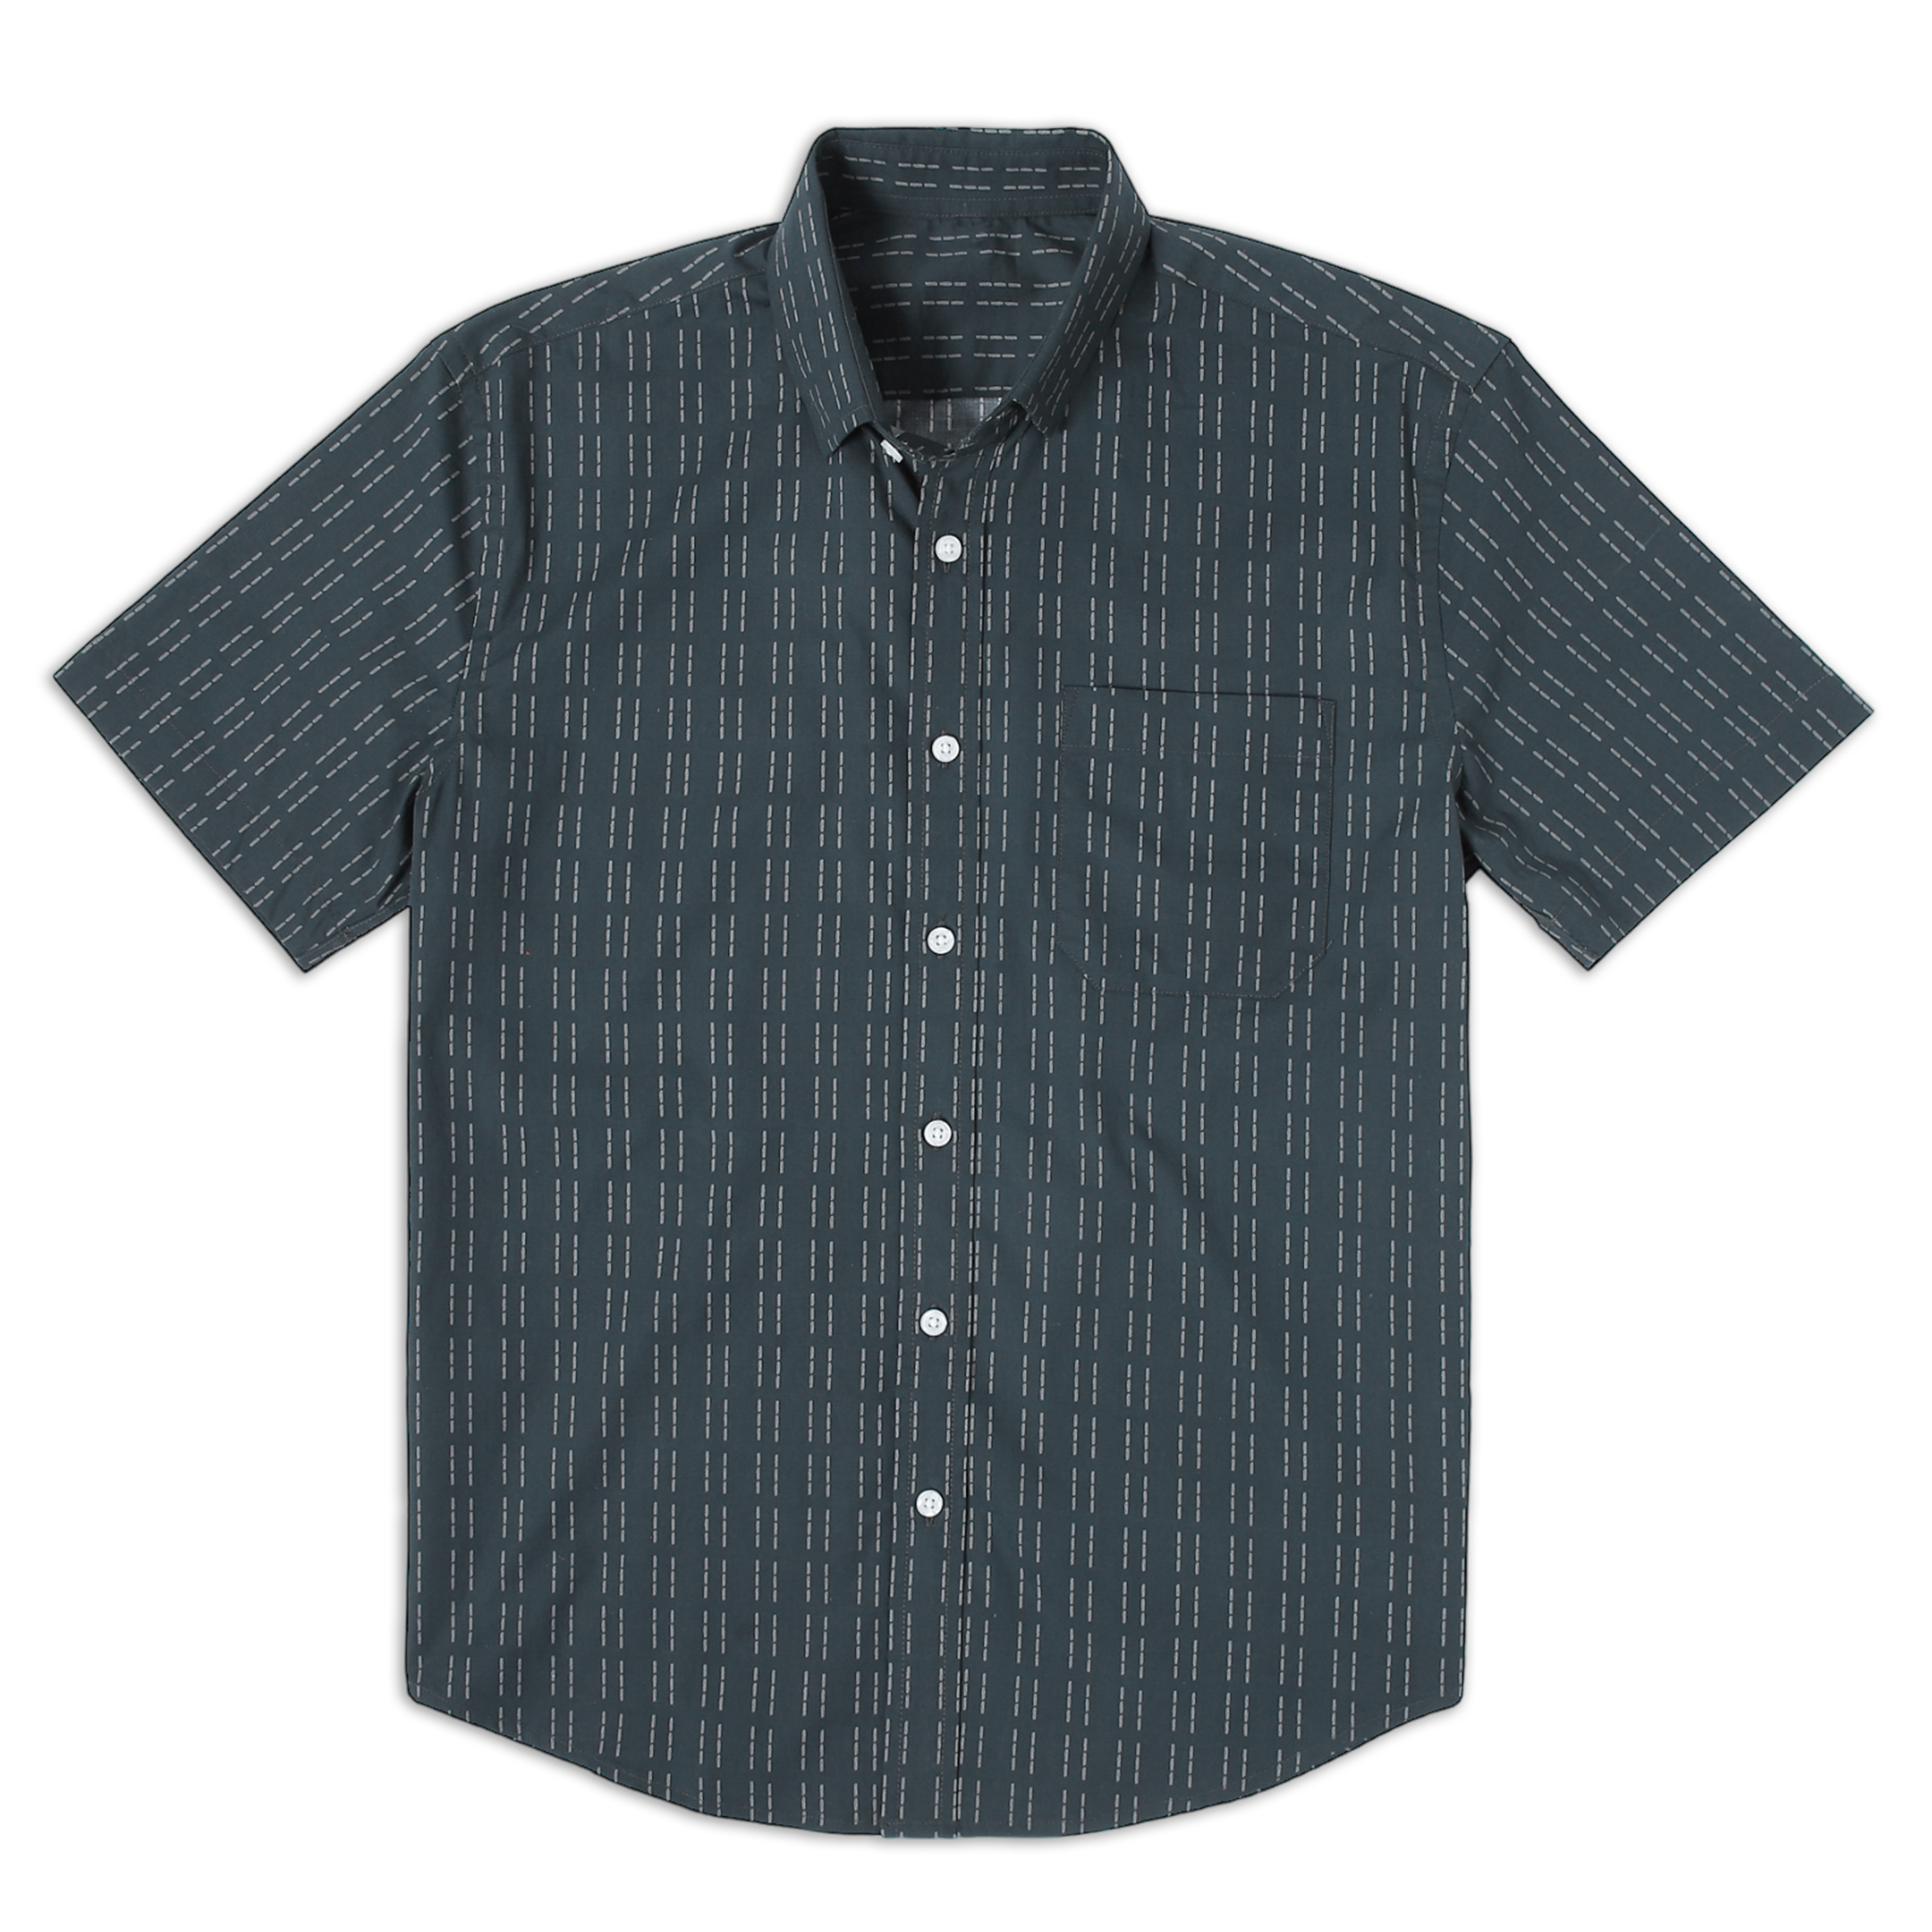 Marina Shirt Coal front with white buttons, button collar, short sleeves and front left patch pocket